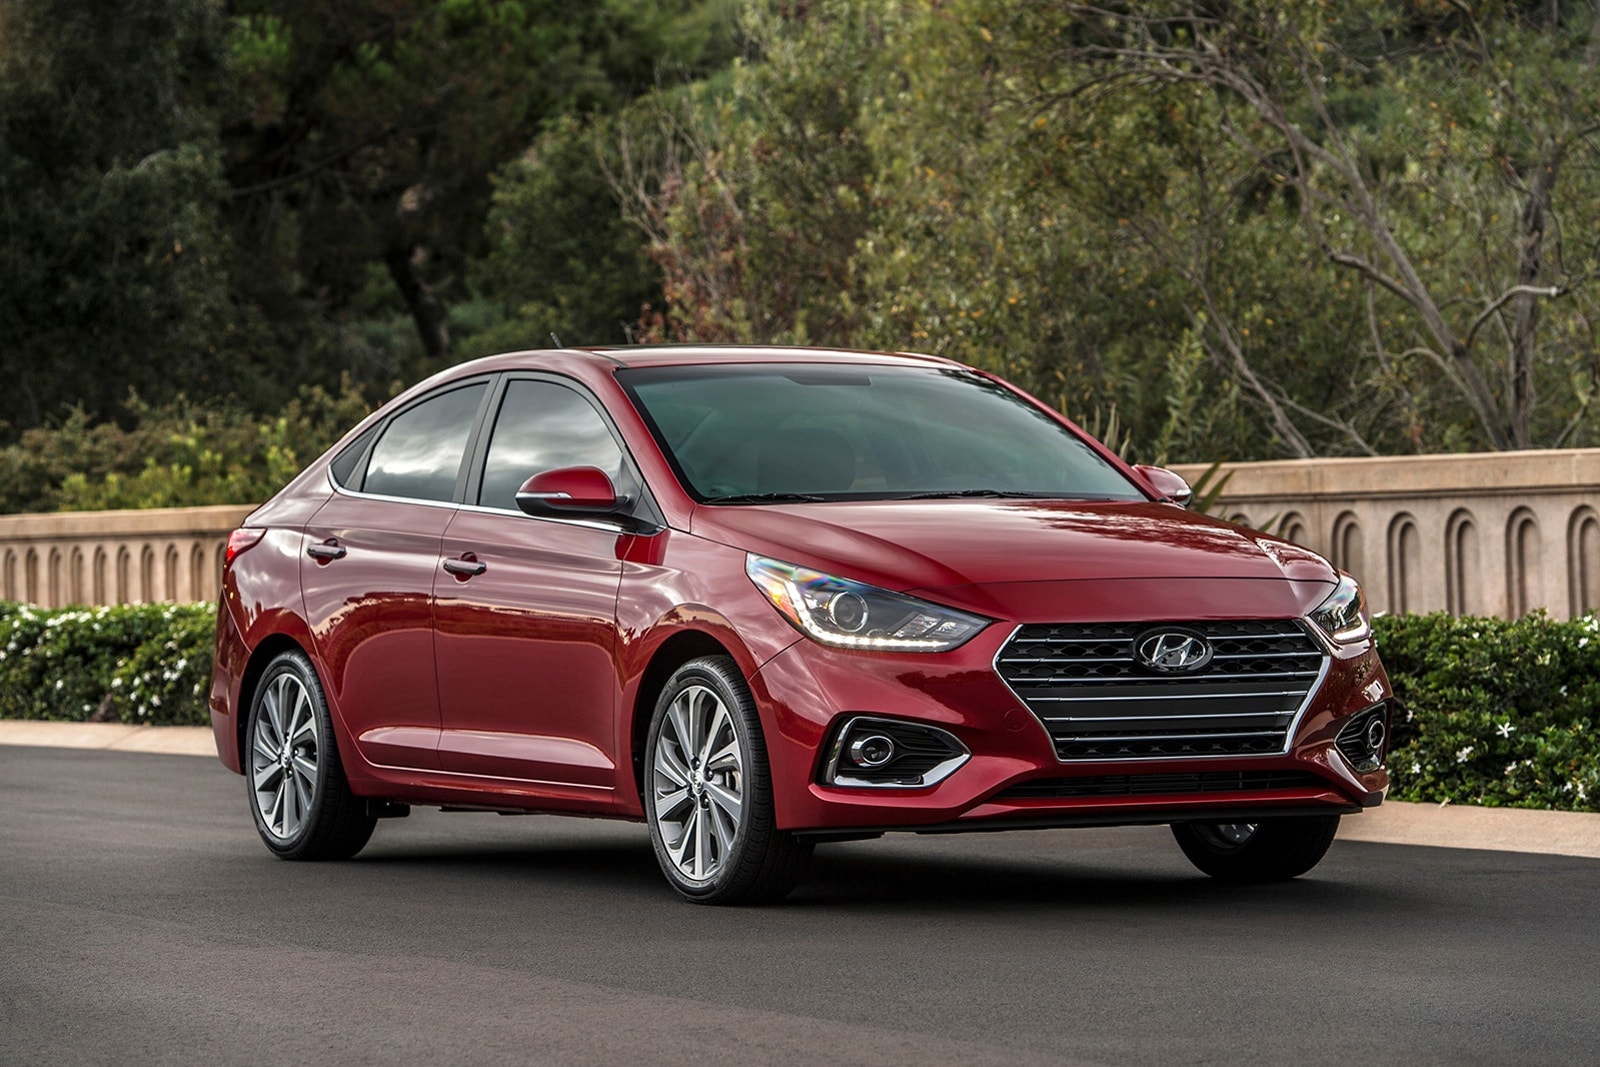 Hyundai Accent front three-quarters view